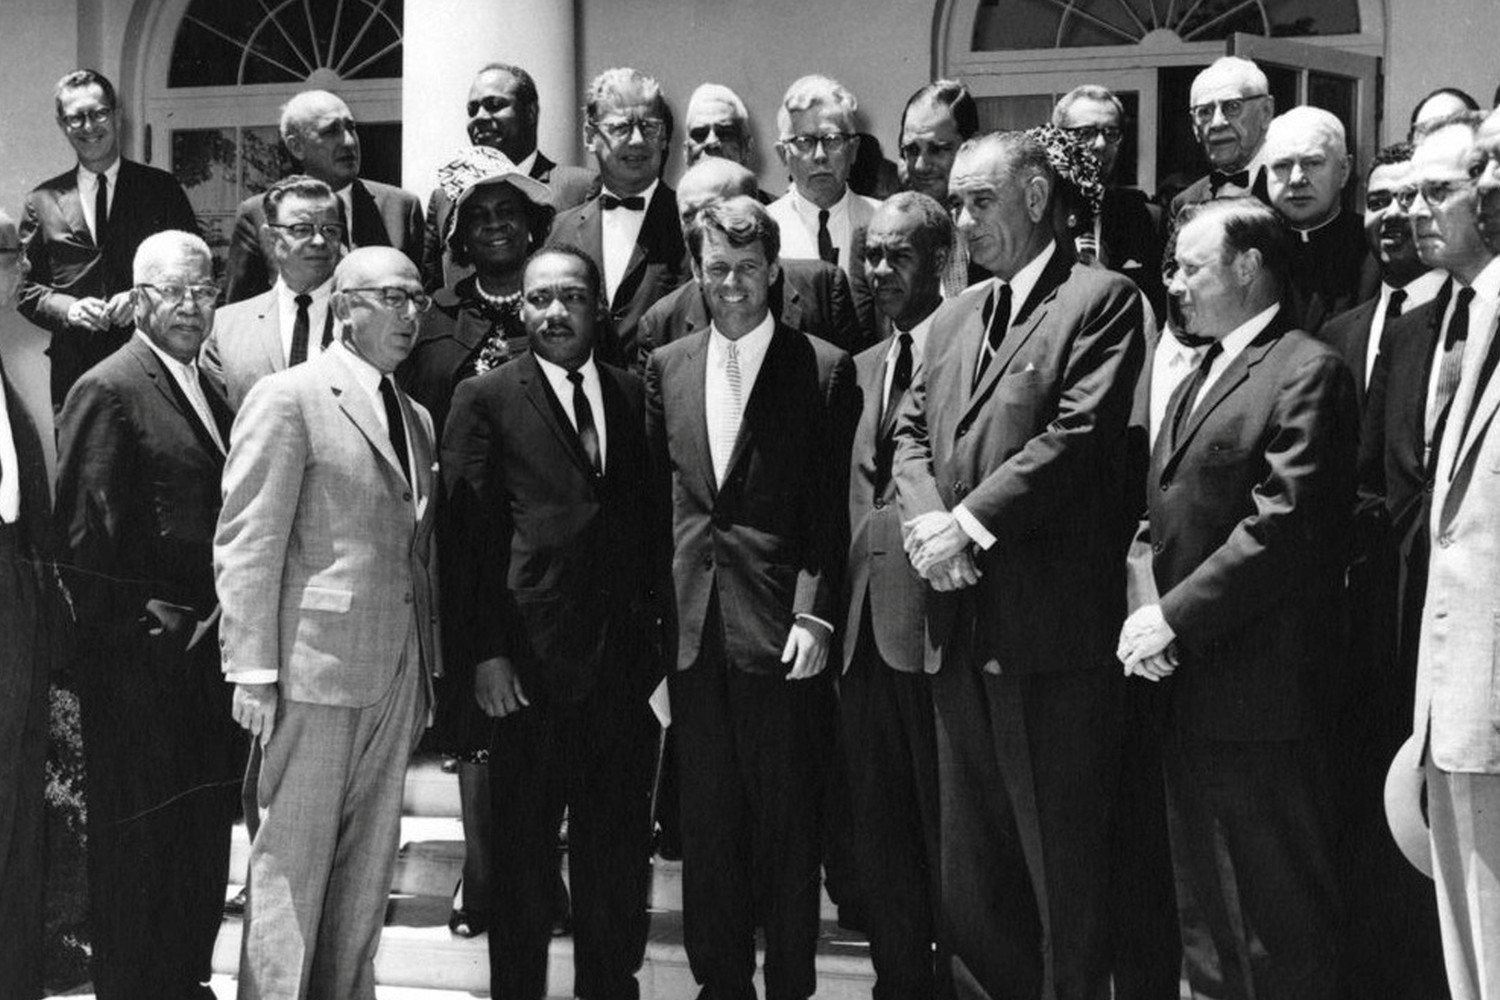 Robert F. Kennedy, center, poses with the Rev. De. Martin Luther King Jr., at Kennedy’s right, and other civil rights leaders in the Rose Garden of the White House in 1963. Fifty years after Rev. Dr. King’s assassination, “we need to ask ourselves if we are doing all we can to build the culture of love, respect and peace to which the Gospel calls us,” the U.S. bishops’ Administrative Committee said March 28.